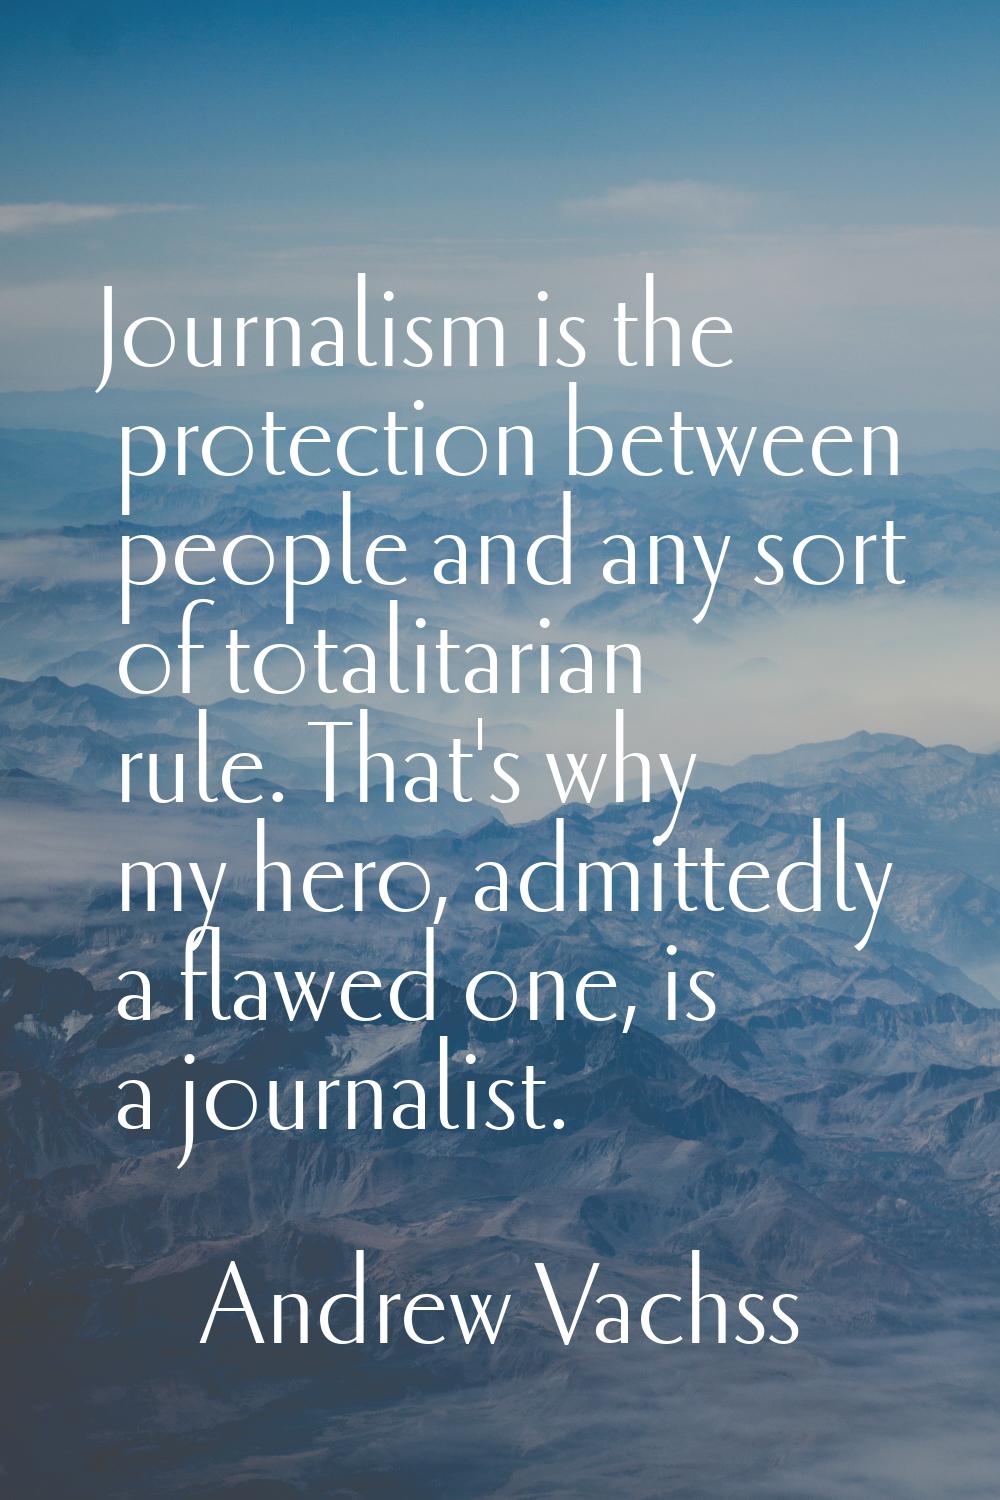 Journalism is the protection between people and any sort of totalitarian rule. That's why my hero, 